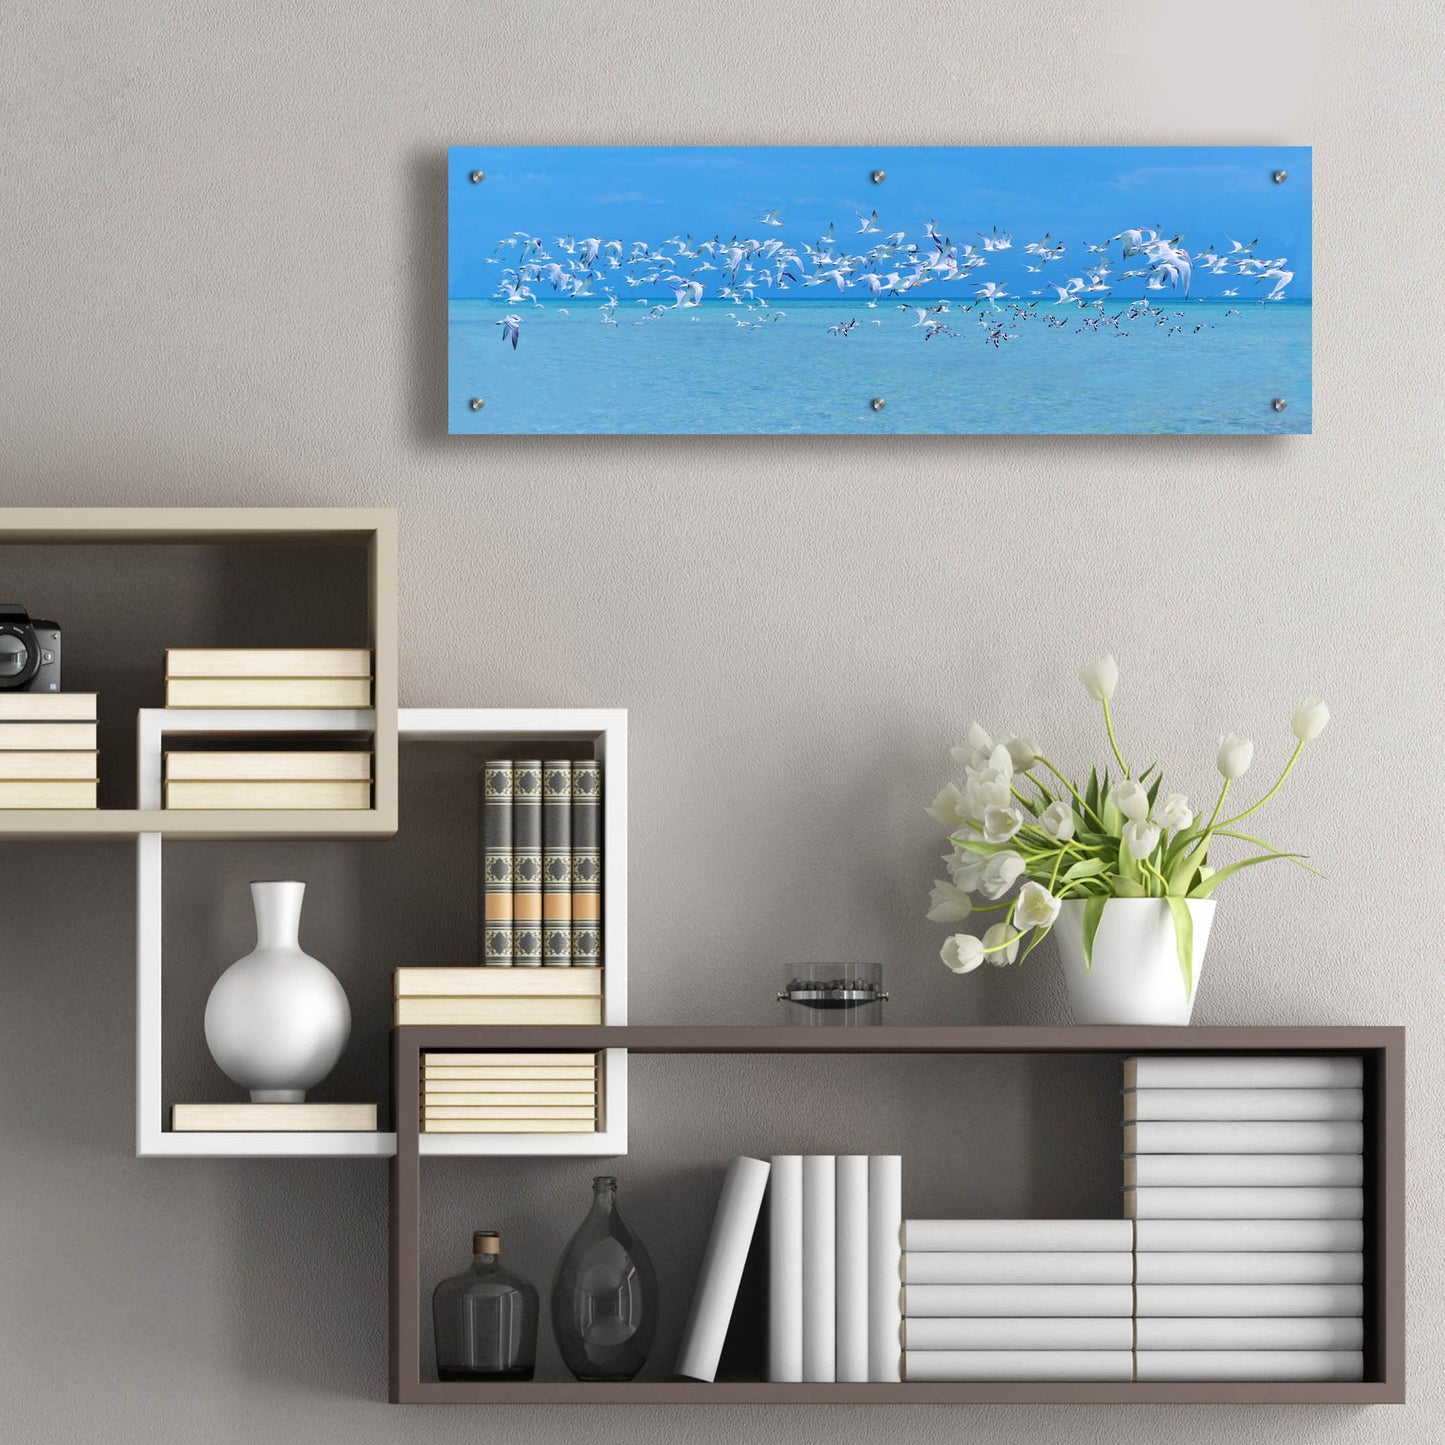 Epic Art ' Sugarlife Seabirds' by Jack Reed, Acrylic Glass Wall Art,36x12